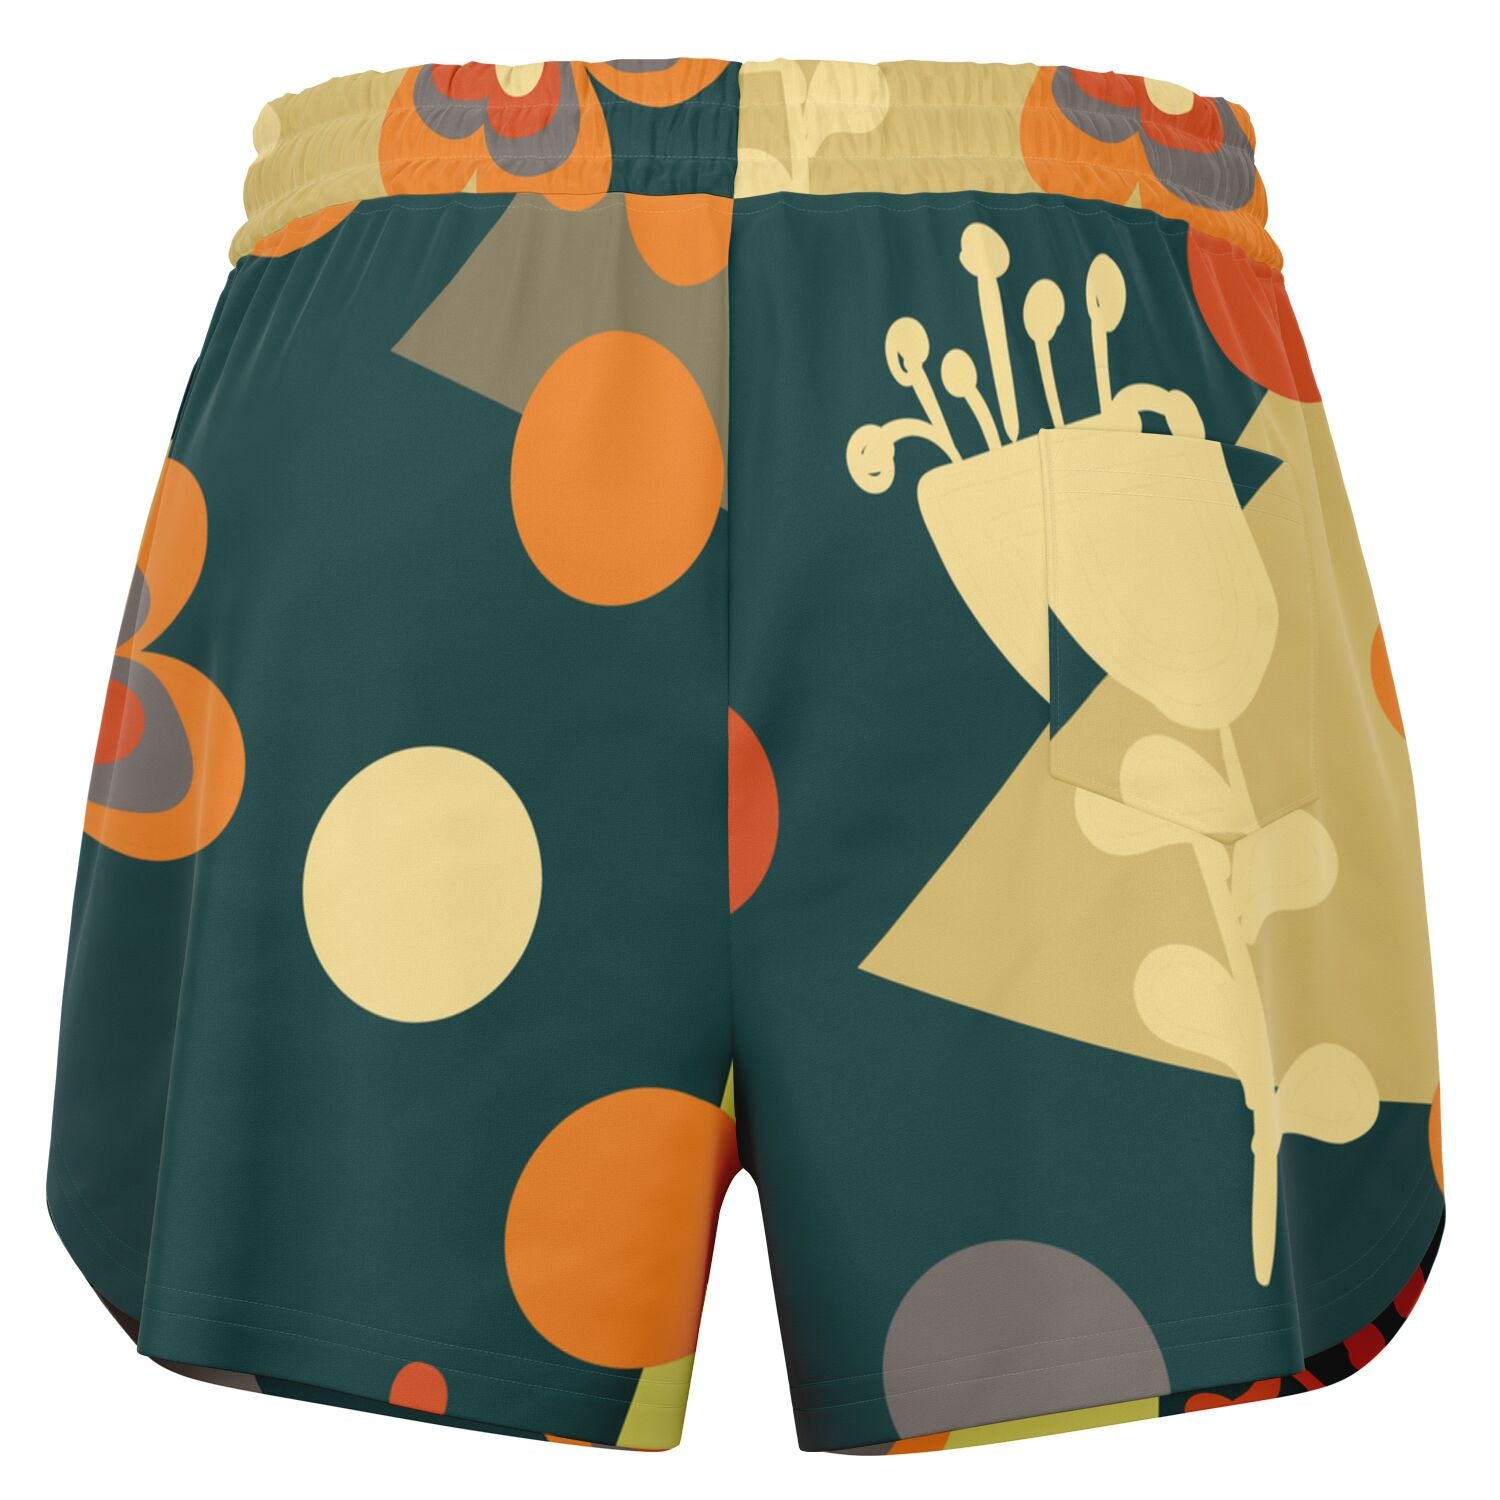 Colorful block print loose shorts - Sport Finesse